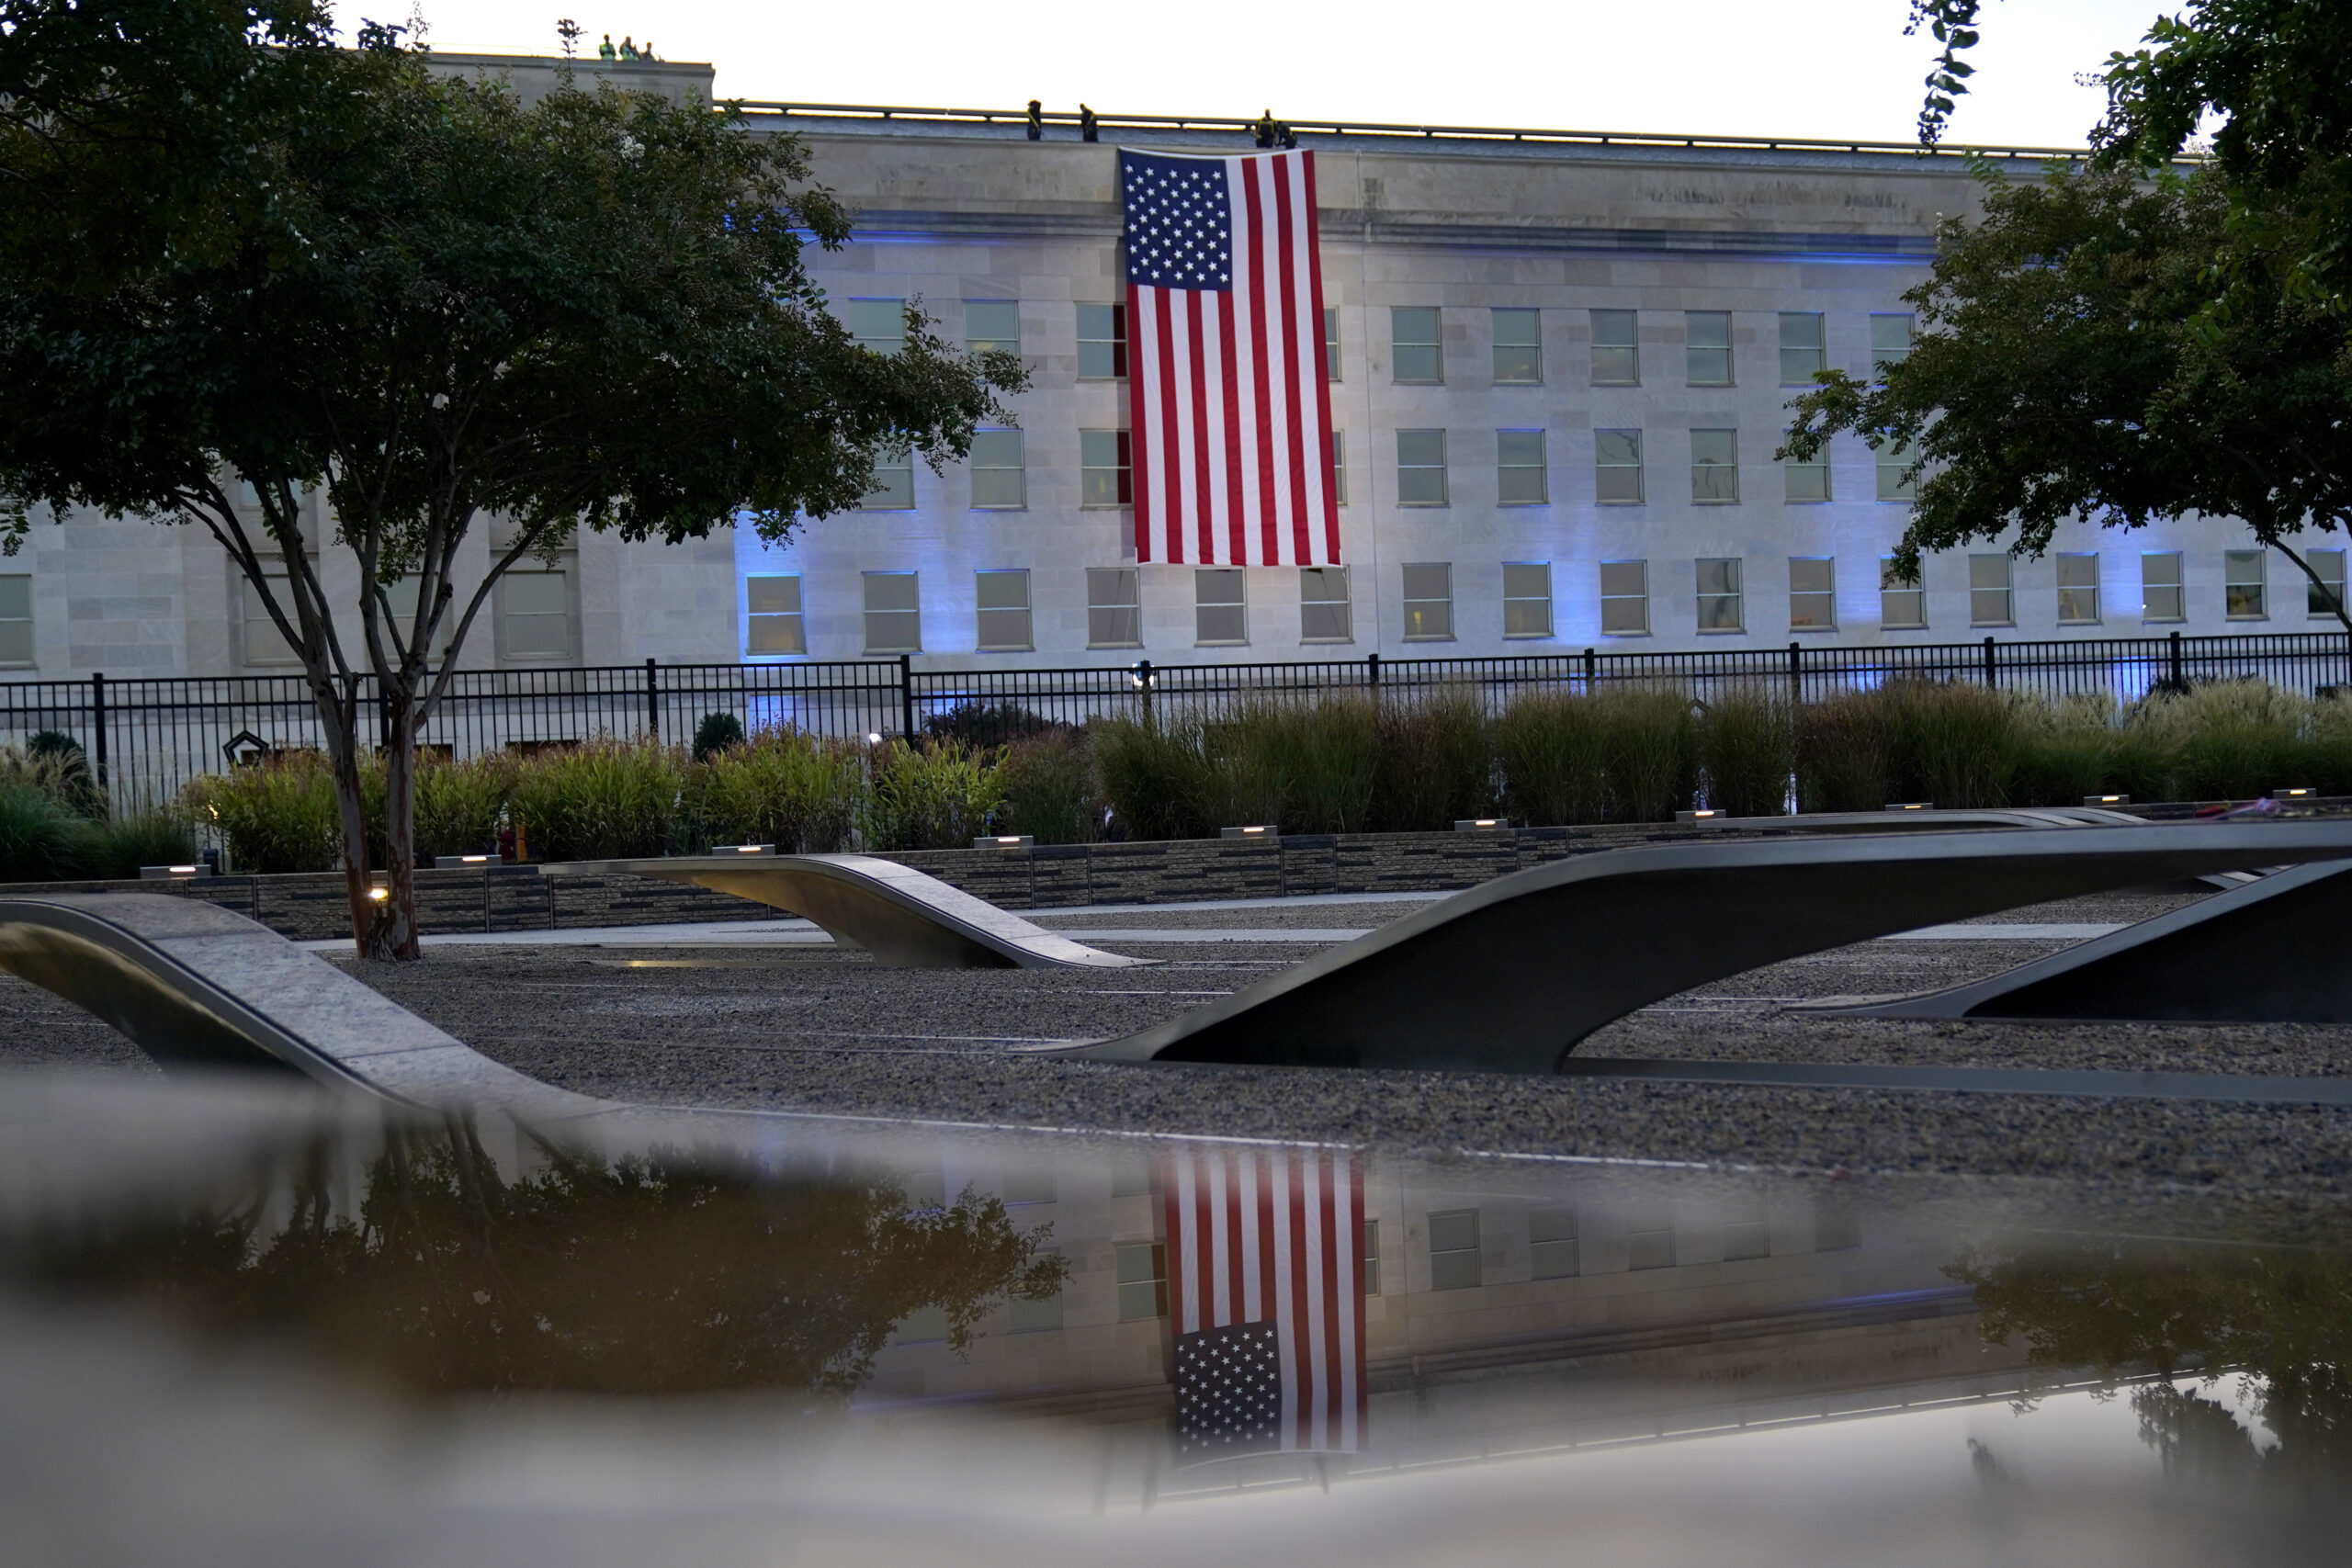 An American flag is unfurled at the Pentagon in Washington, Saturday, Sept. 11, 2021, at sunrise on the morning of the 20th anniversary of the terrorist attacks. The American flag is draped over the site of impact at the Pentagon. In the foreground, the National 9/11 Pentagon Memorial, opened in 2008 adjacent to the site, commemorates the lives lost at the Pentagon and onboard American Airlines Flight 77. (AP Photo/Alex Brandon)